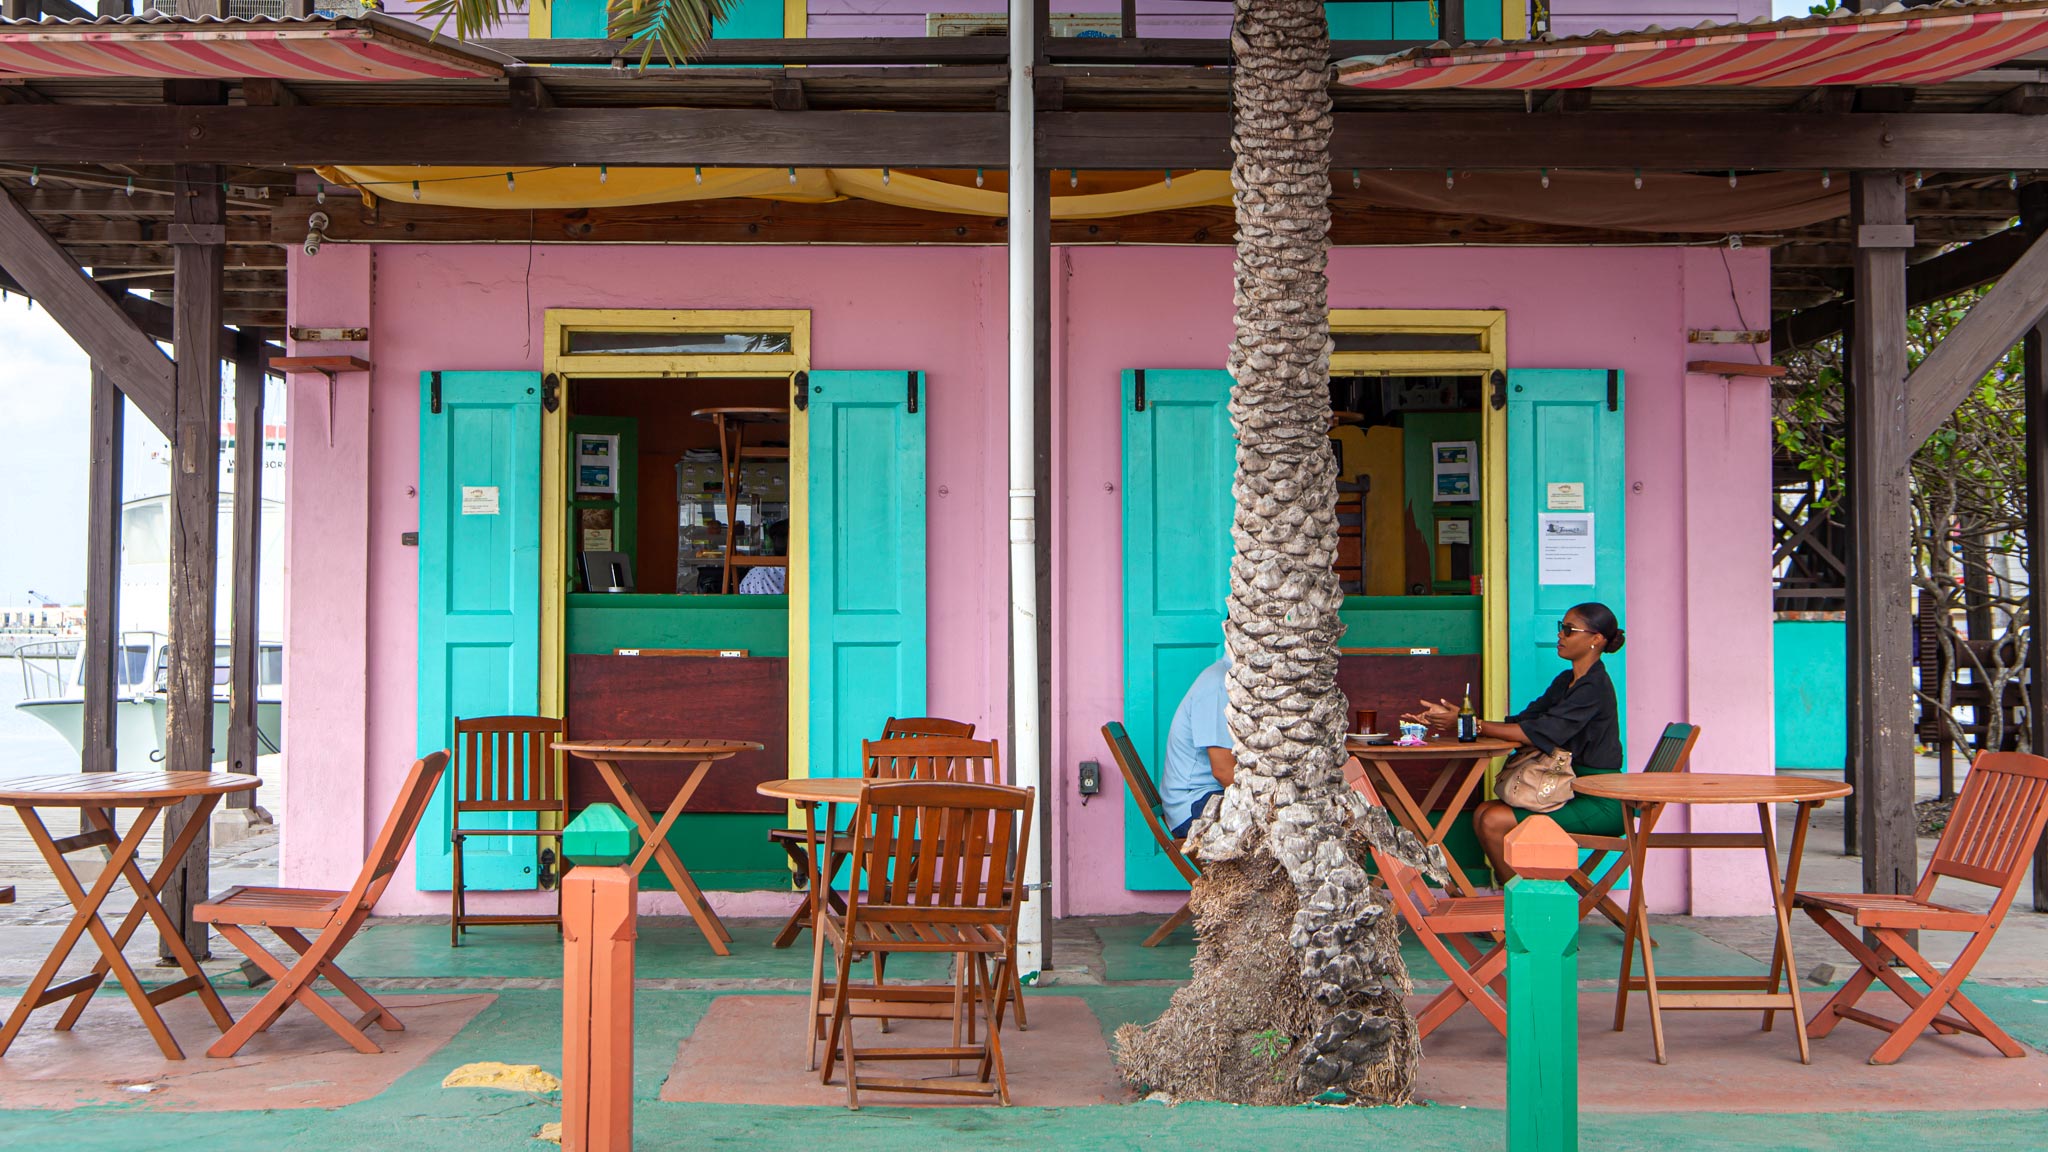 The colourful building of St Johns the capital of Antigua